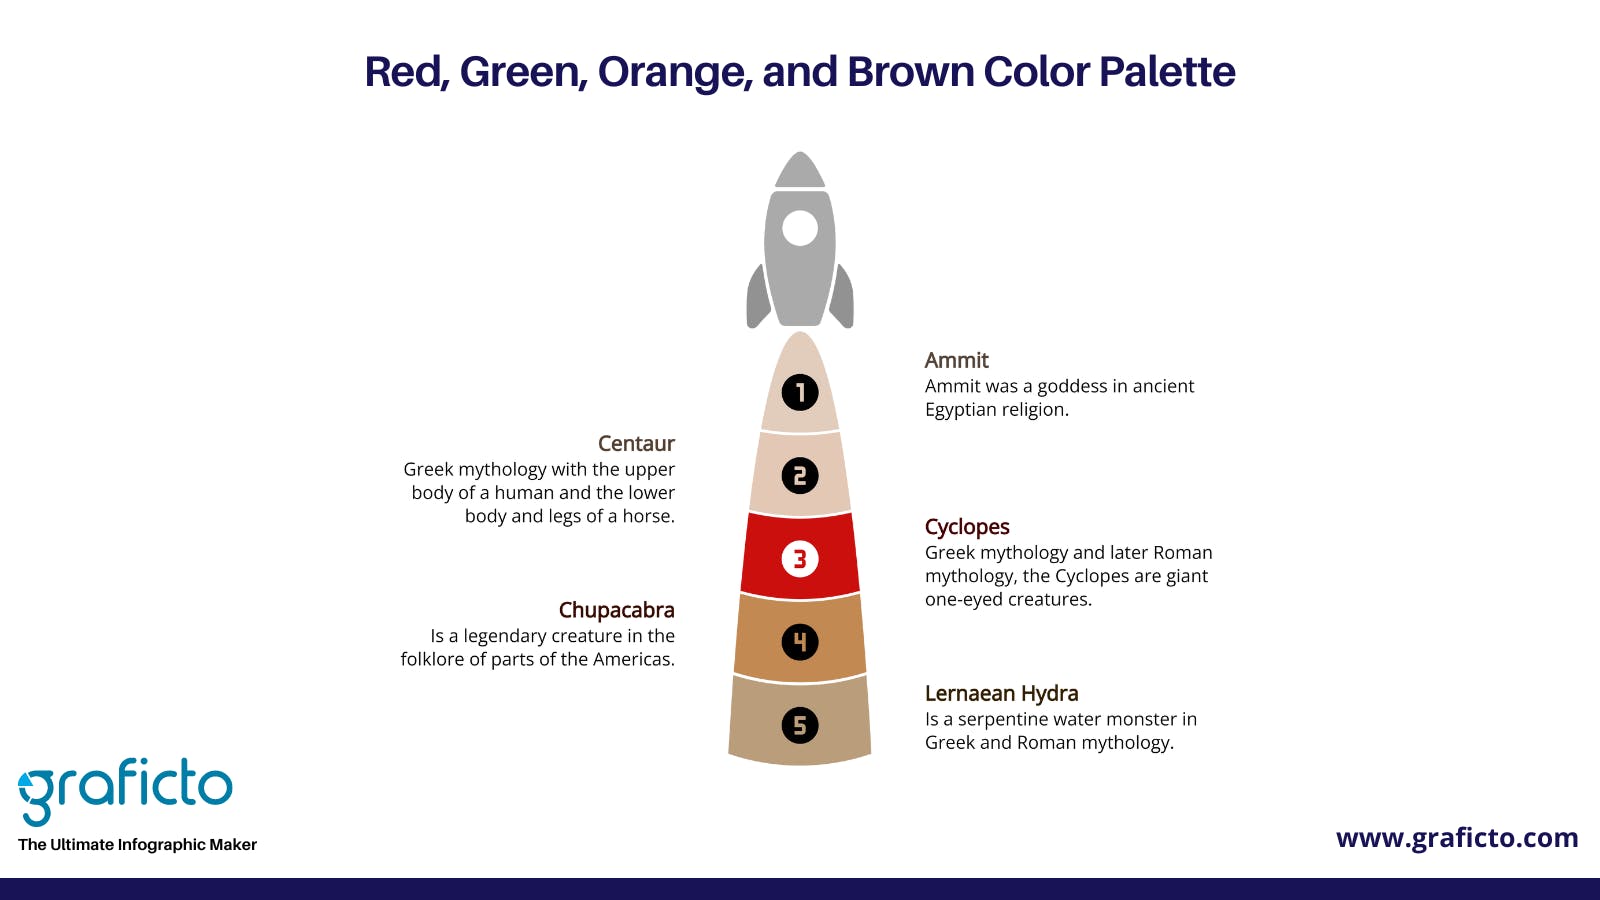 Red, Green, Orange, and Brown graficto Christmas Color Palettes